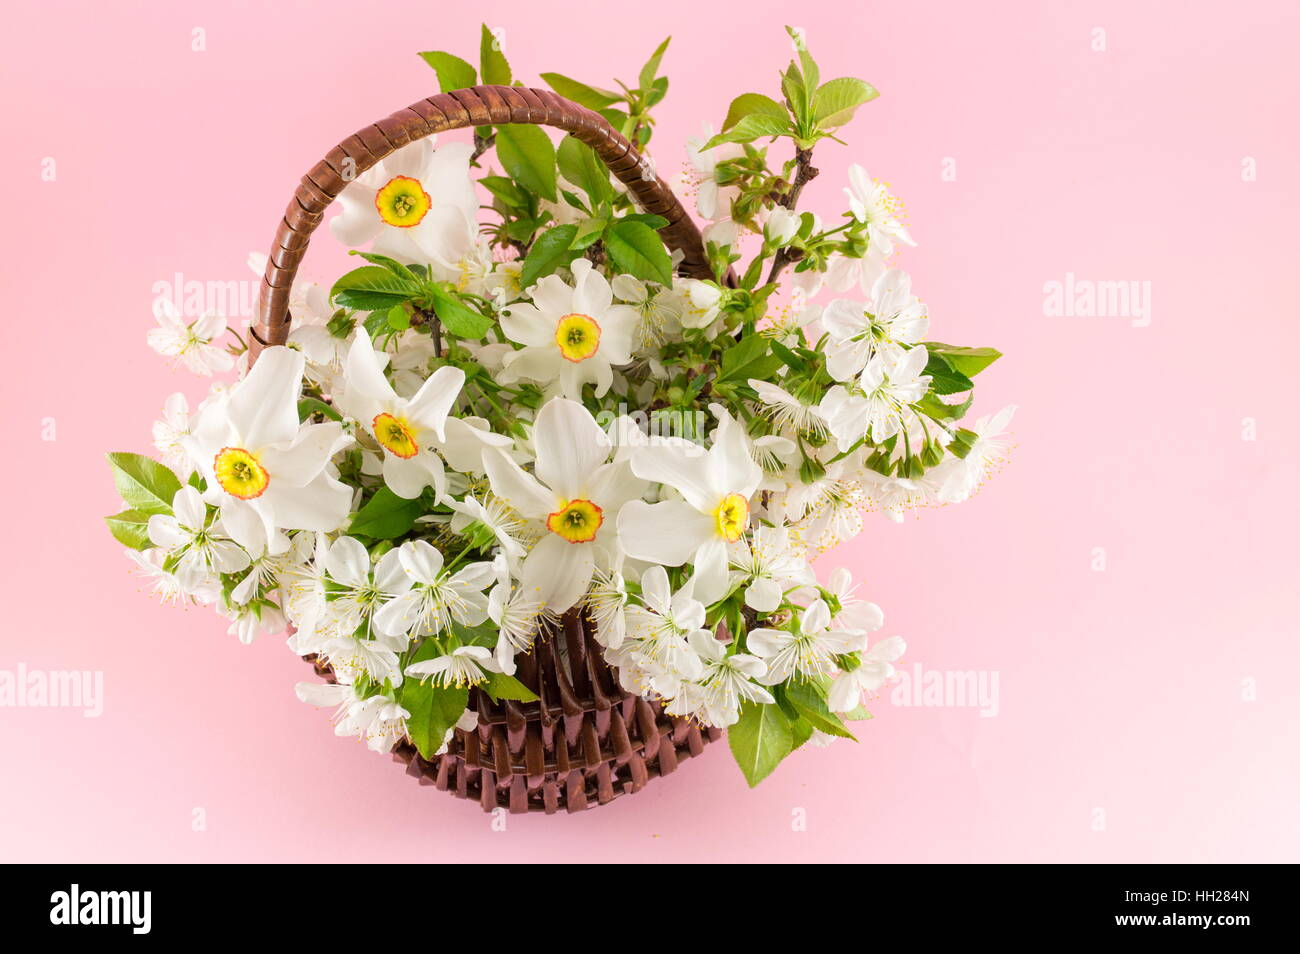 Narcissus flowers bouquet on pink background. Spring time Stock Photo